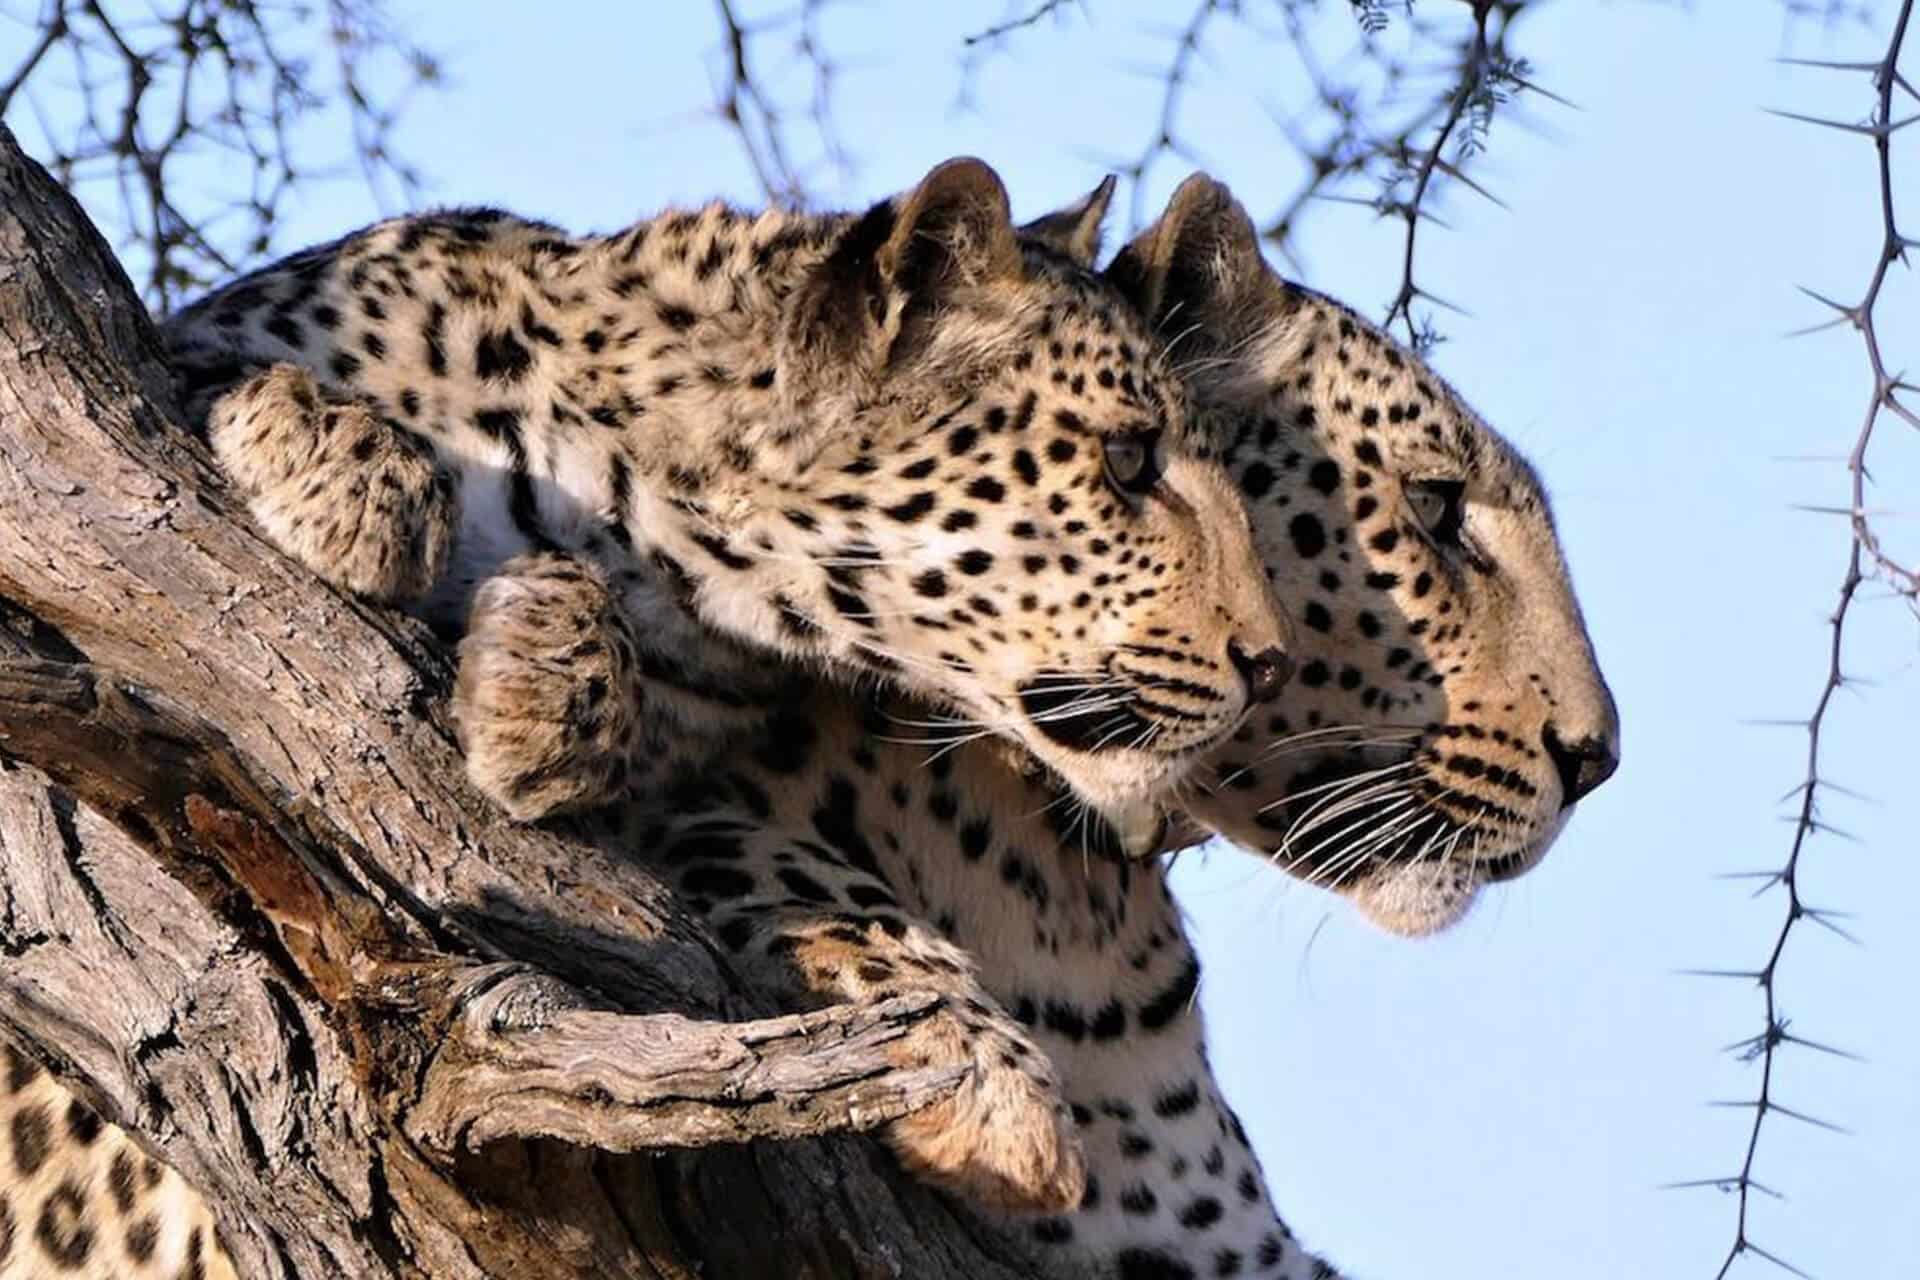 Leopard sighting while staying at one of the luxury safari villas